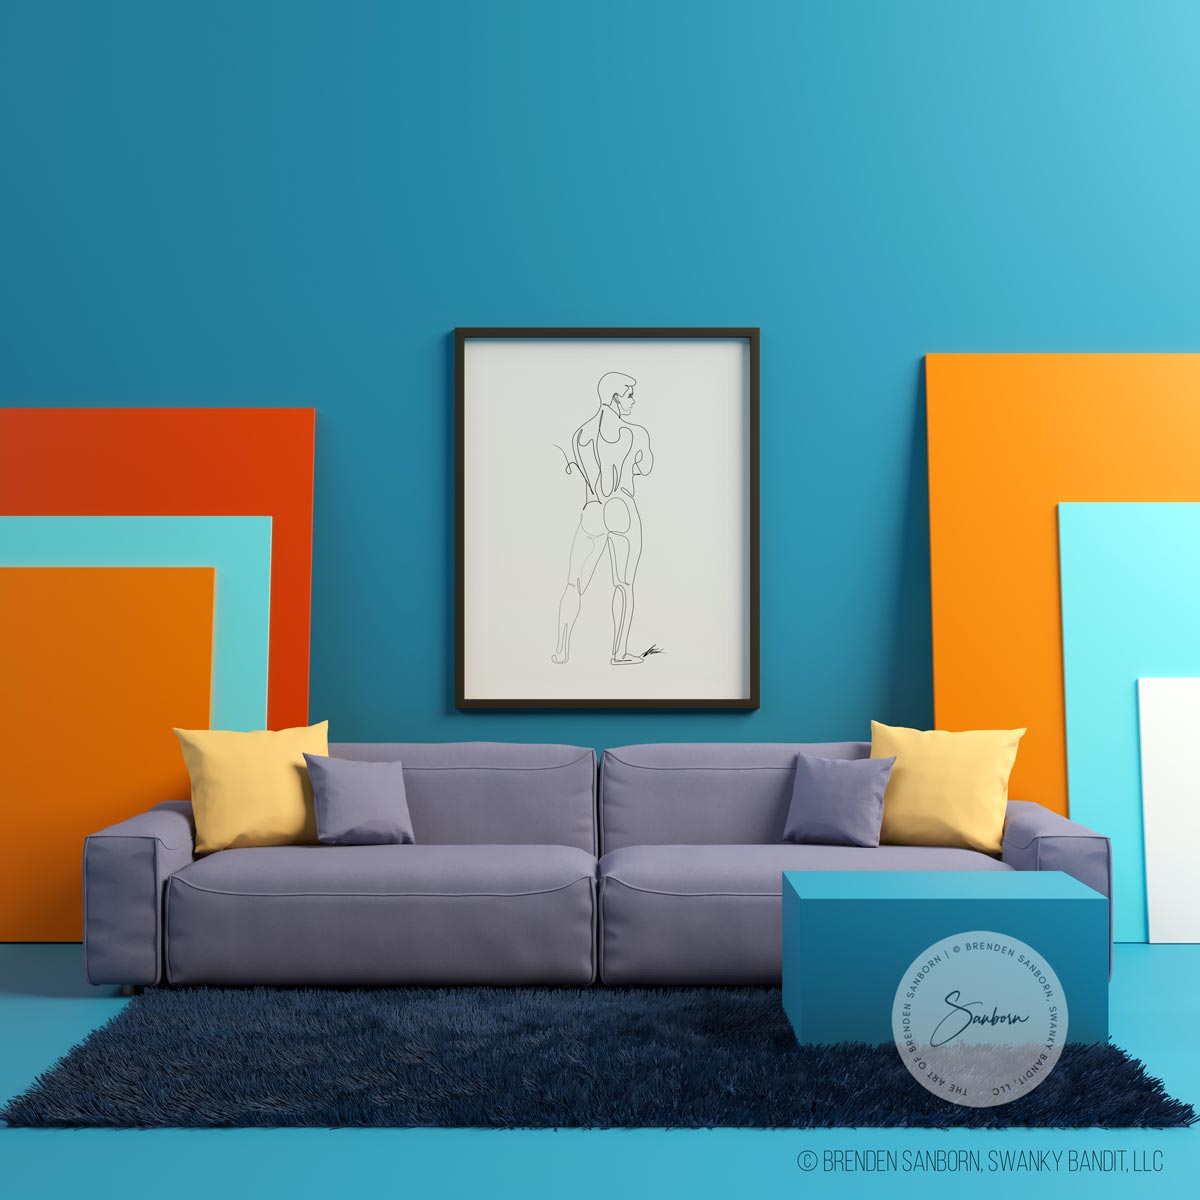 Stance of Poise - Male Figure with Confident Posture - Giclee Art Print